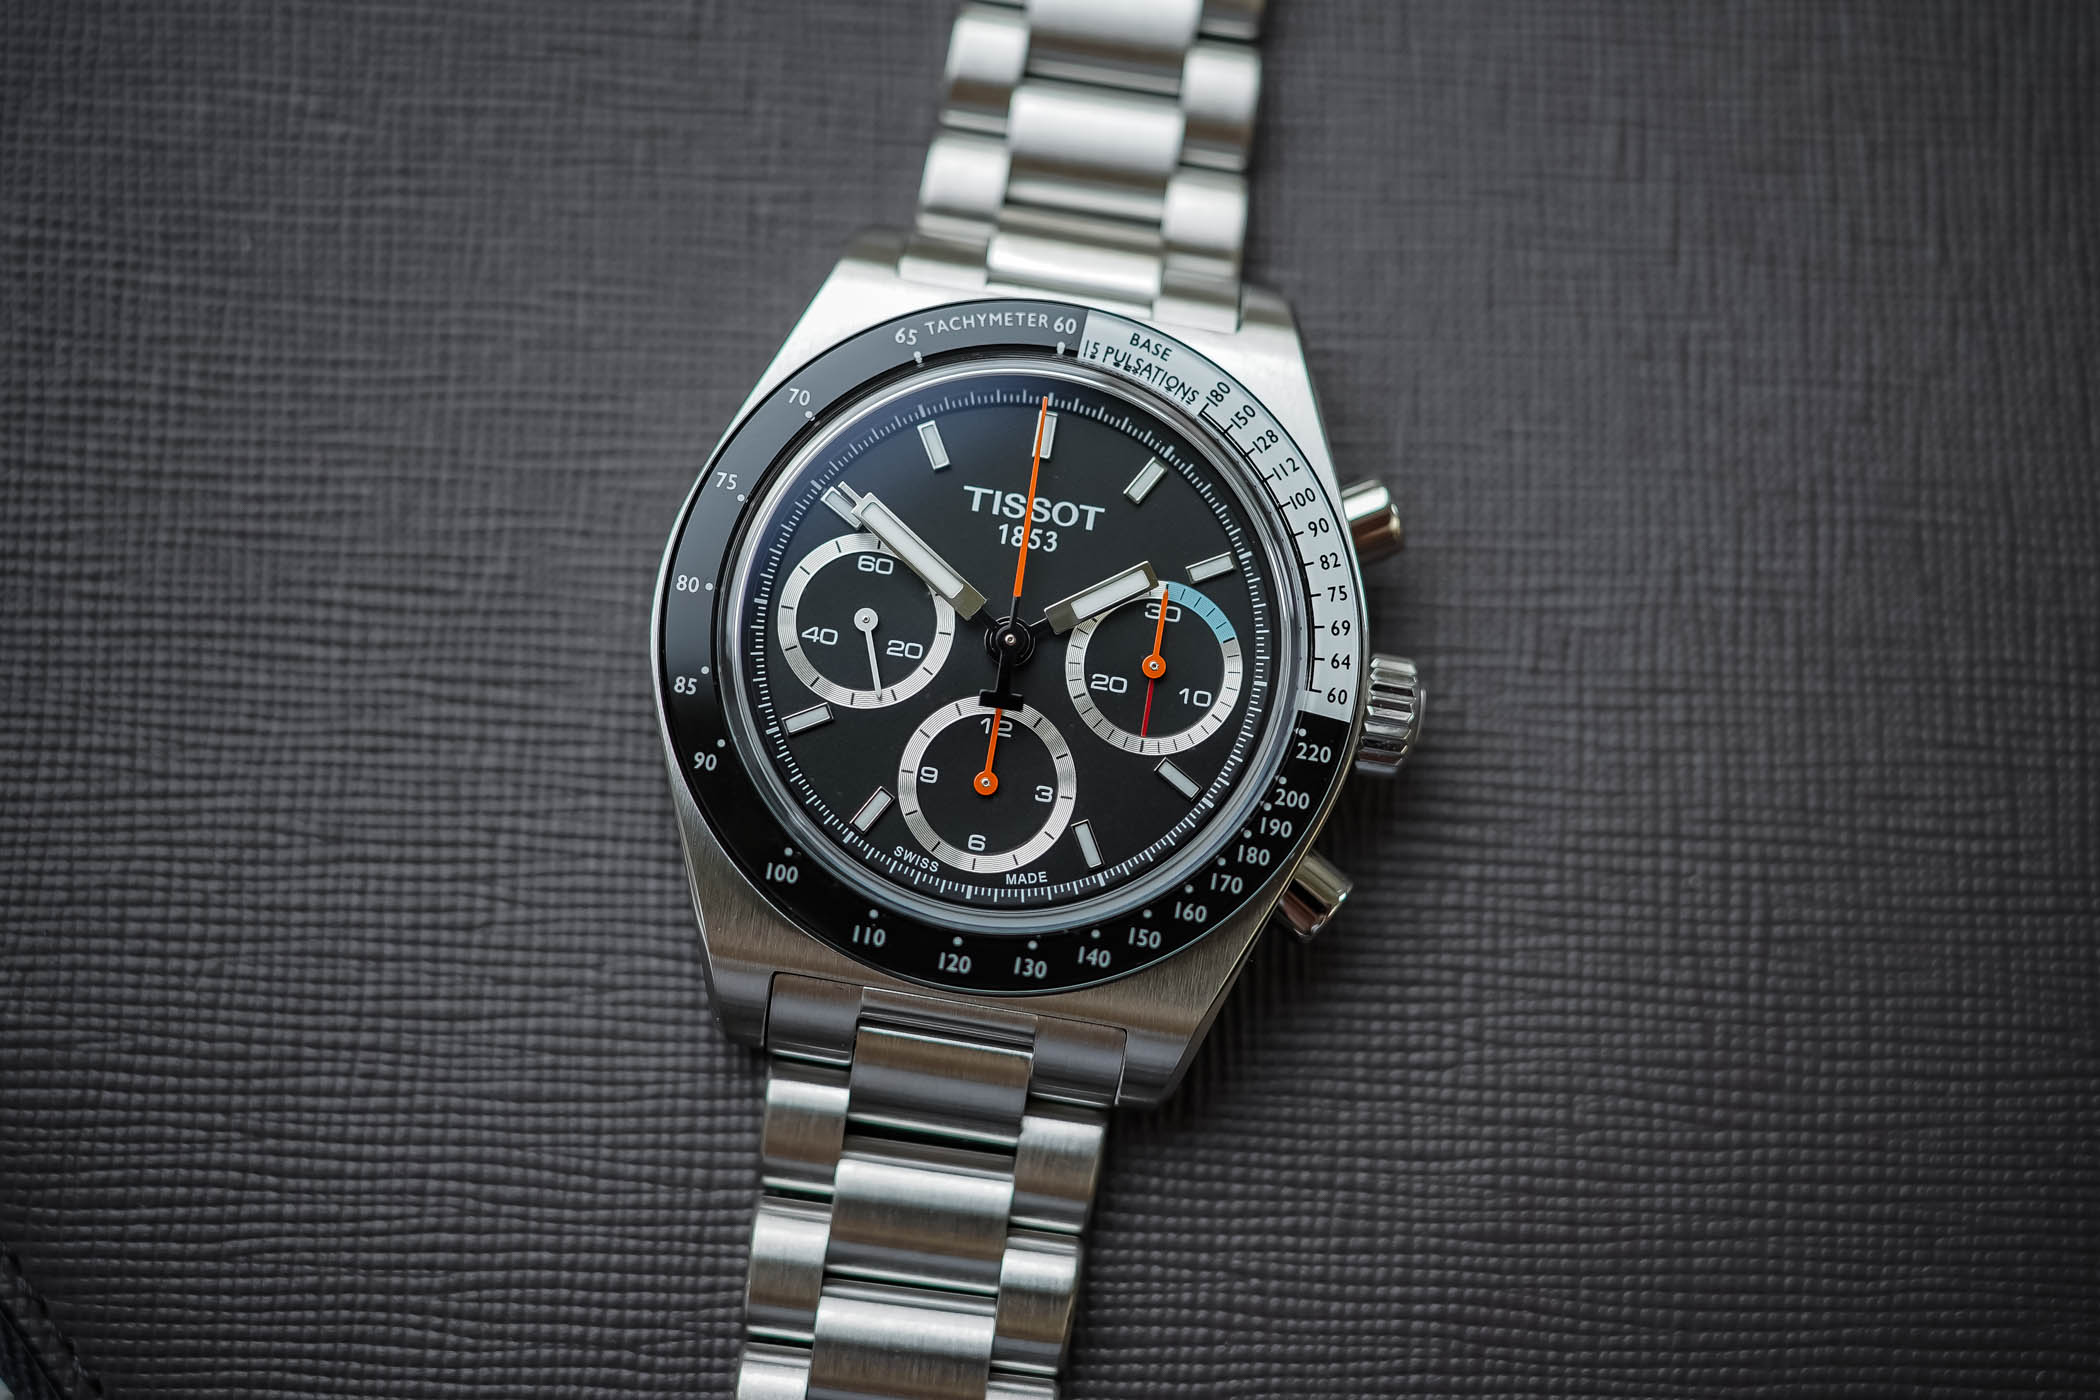 First Look: The New Tissot PR516 Chronograph Mechanical (Incl. Video)